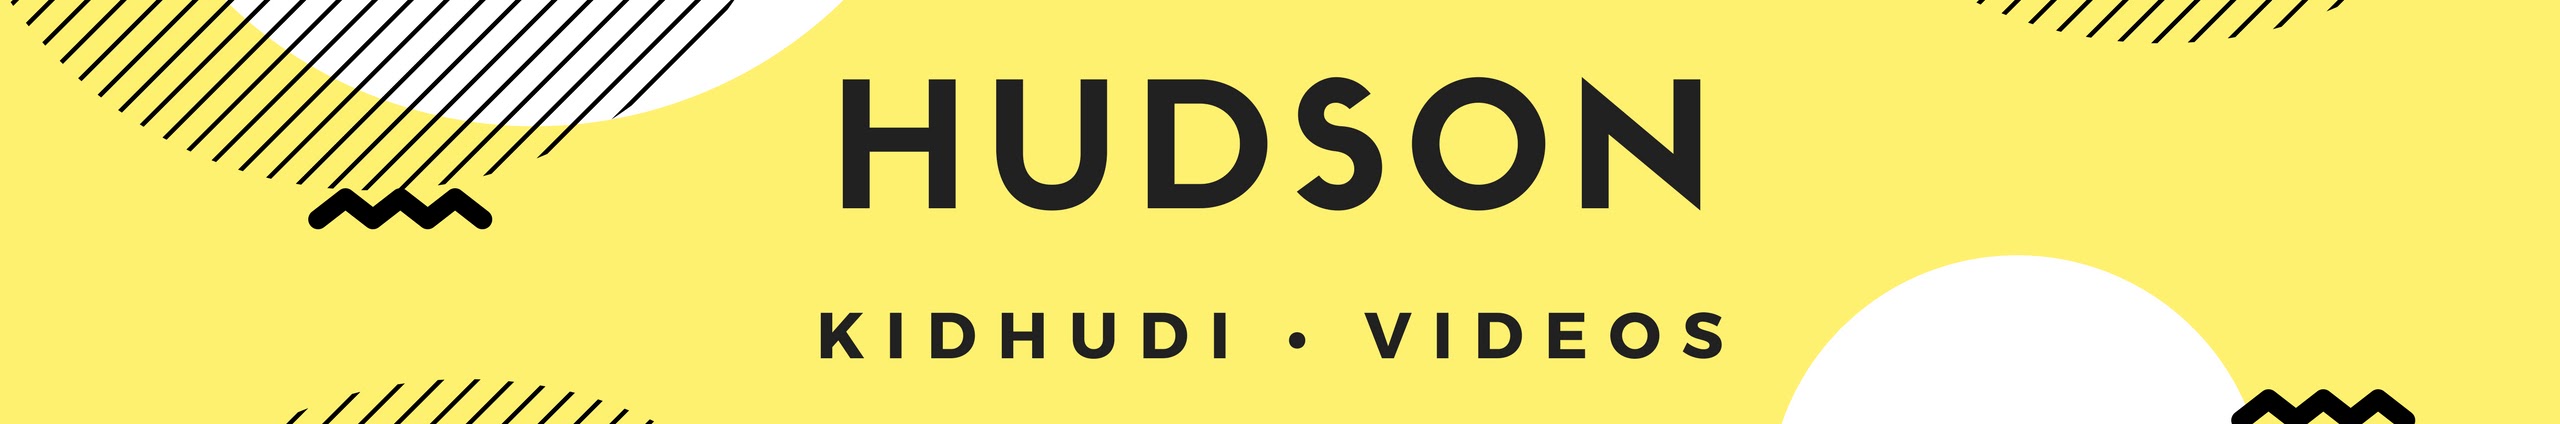 Hudson Kid Hudi Youtube Channel Analytics And Report Powered By